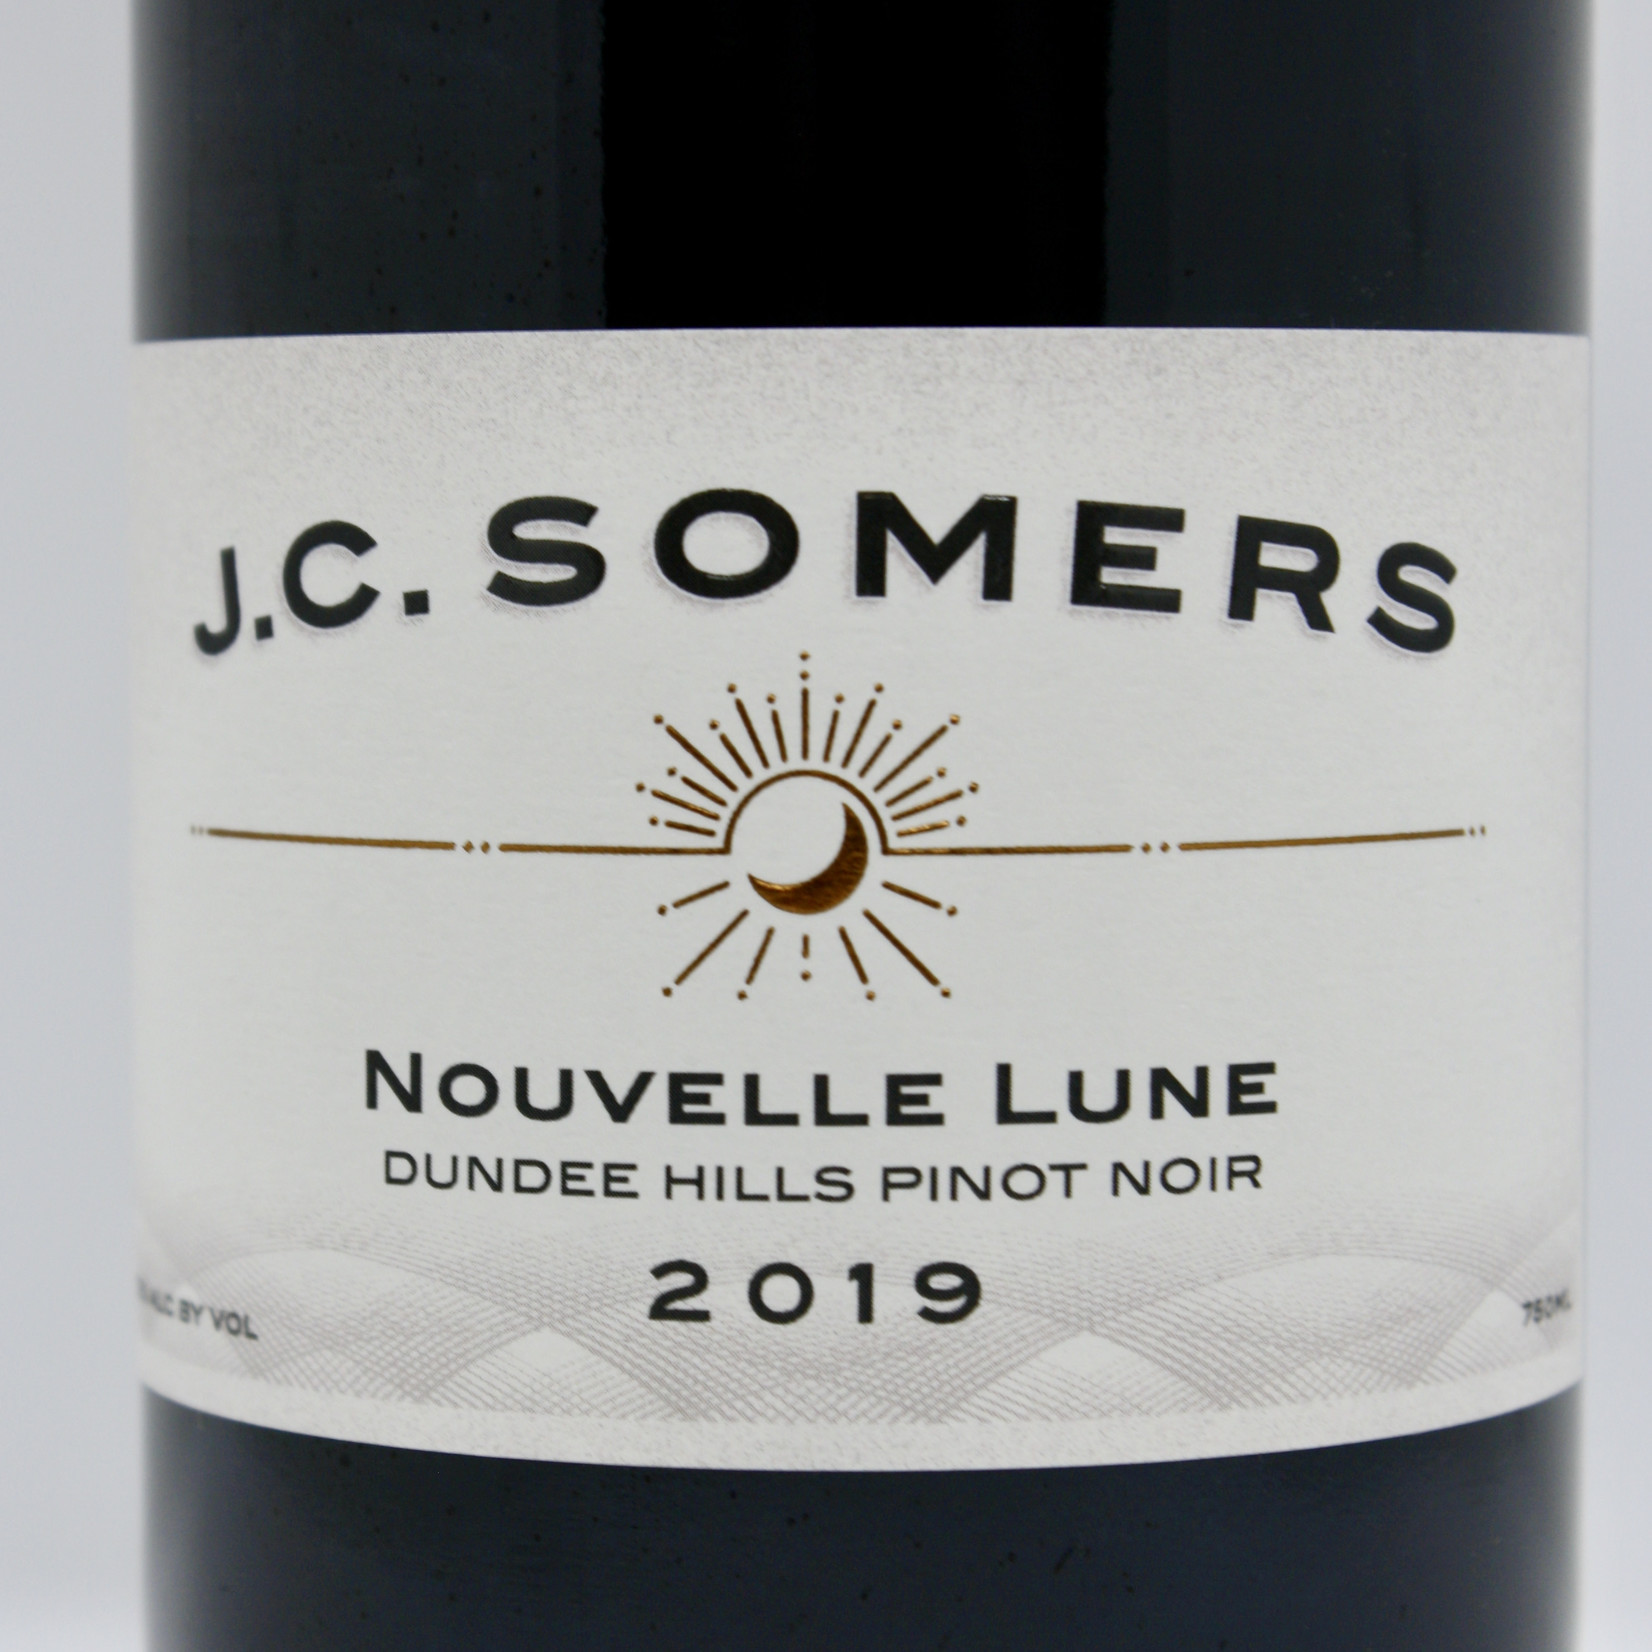 J.C.Somers Vinters J.C. Somers, "Nouvelle Lune" Pinot Noir 2019, Dundee Hills, Willamette Valley, OR